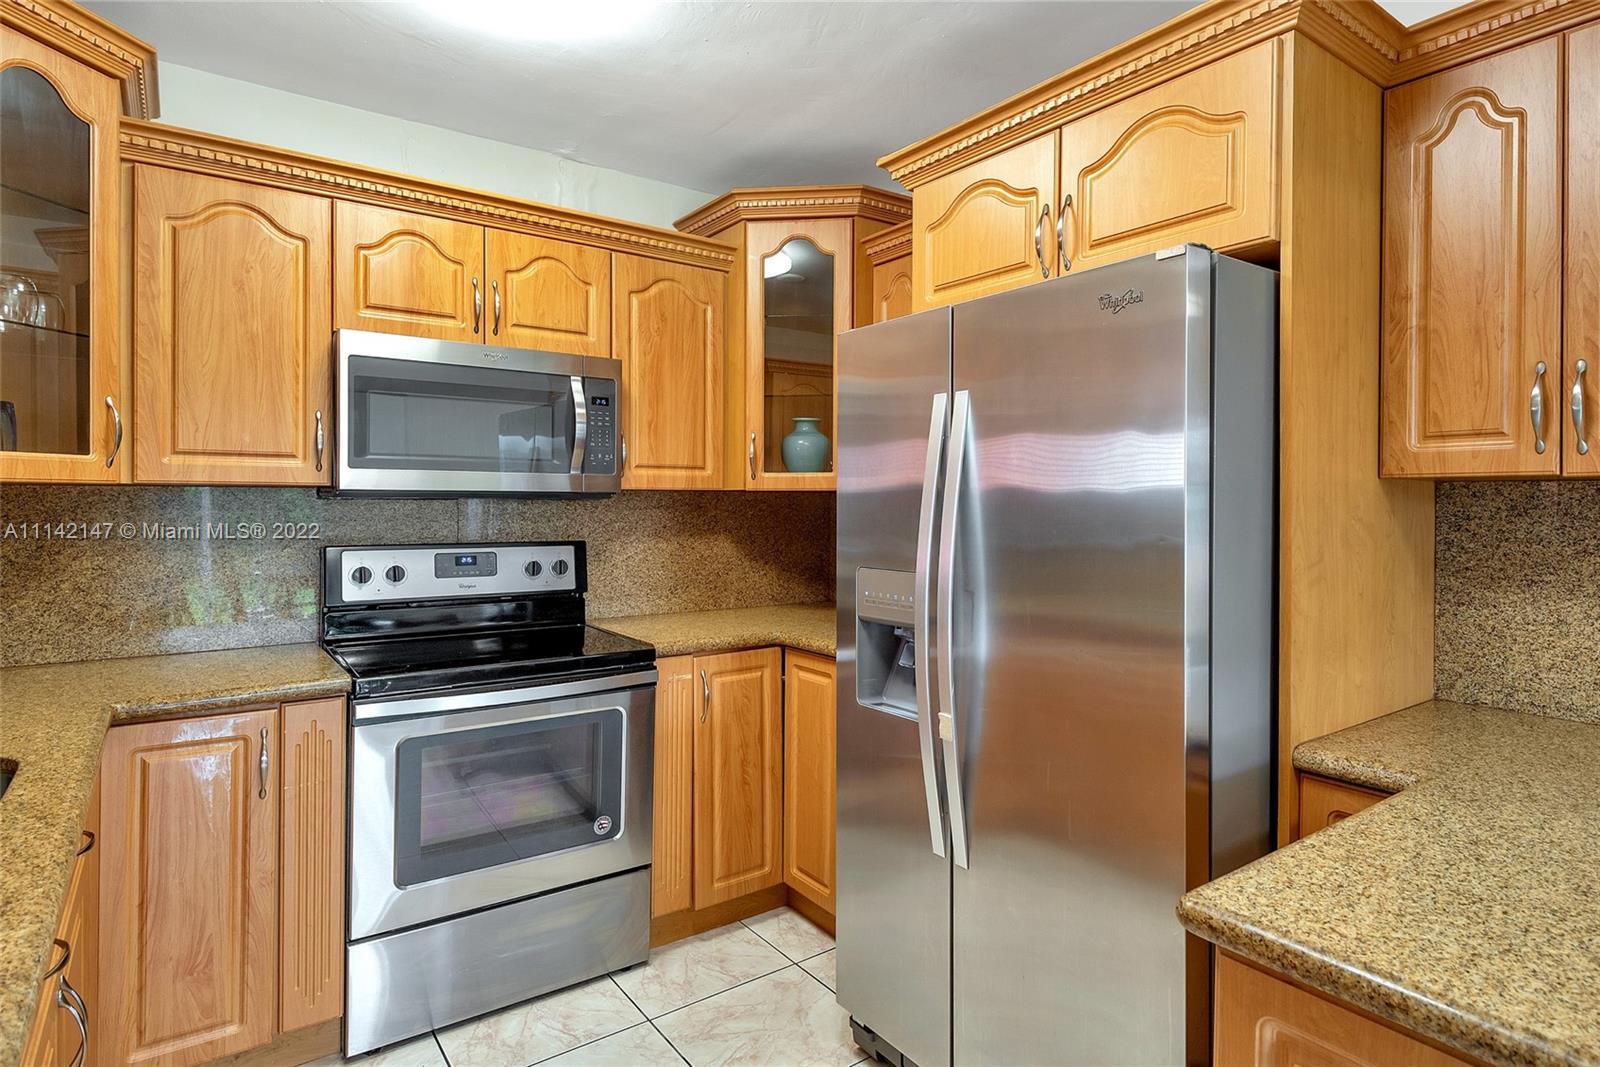 Stainless steel appliances!